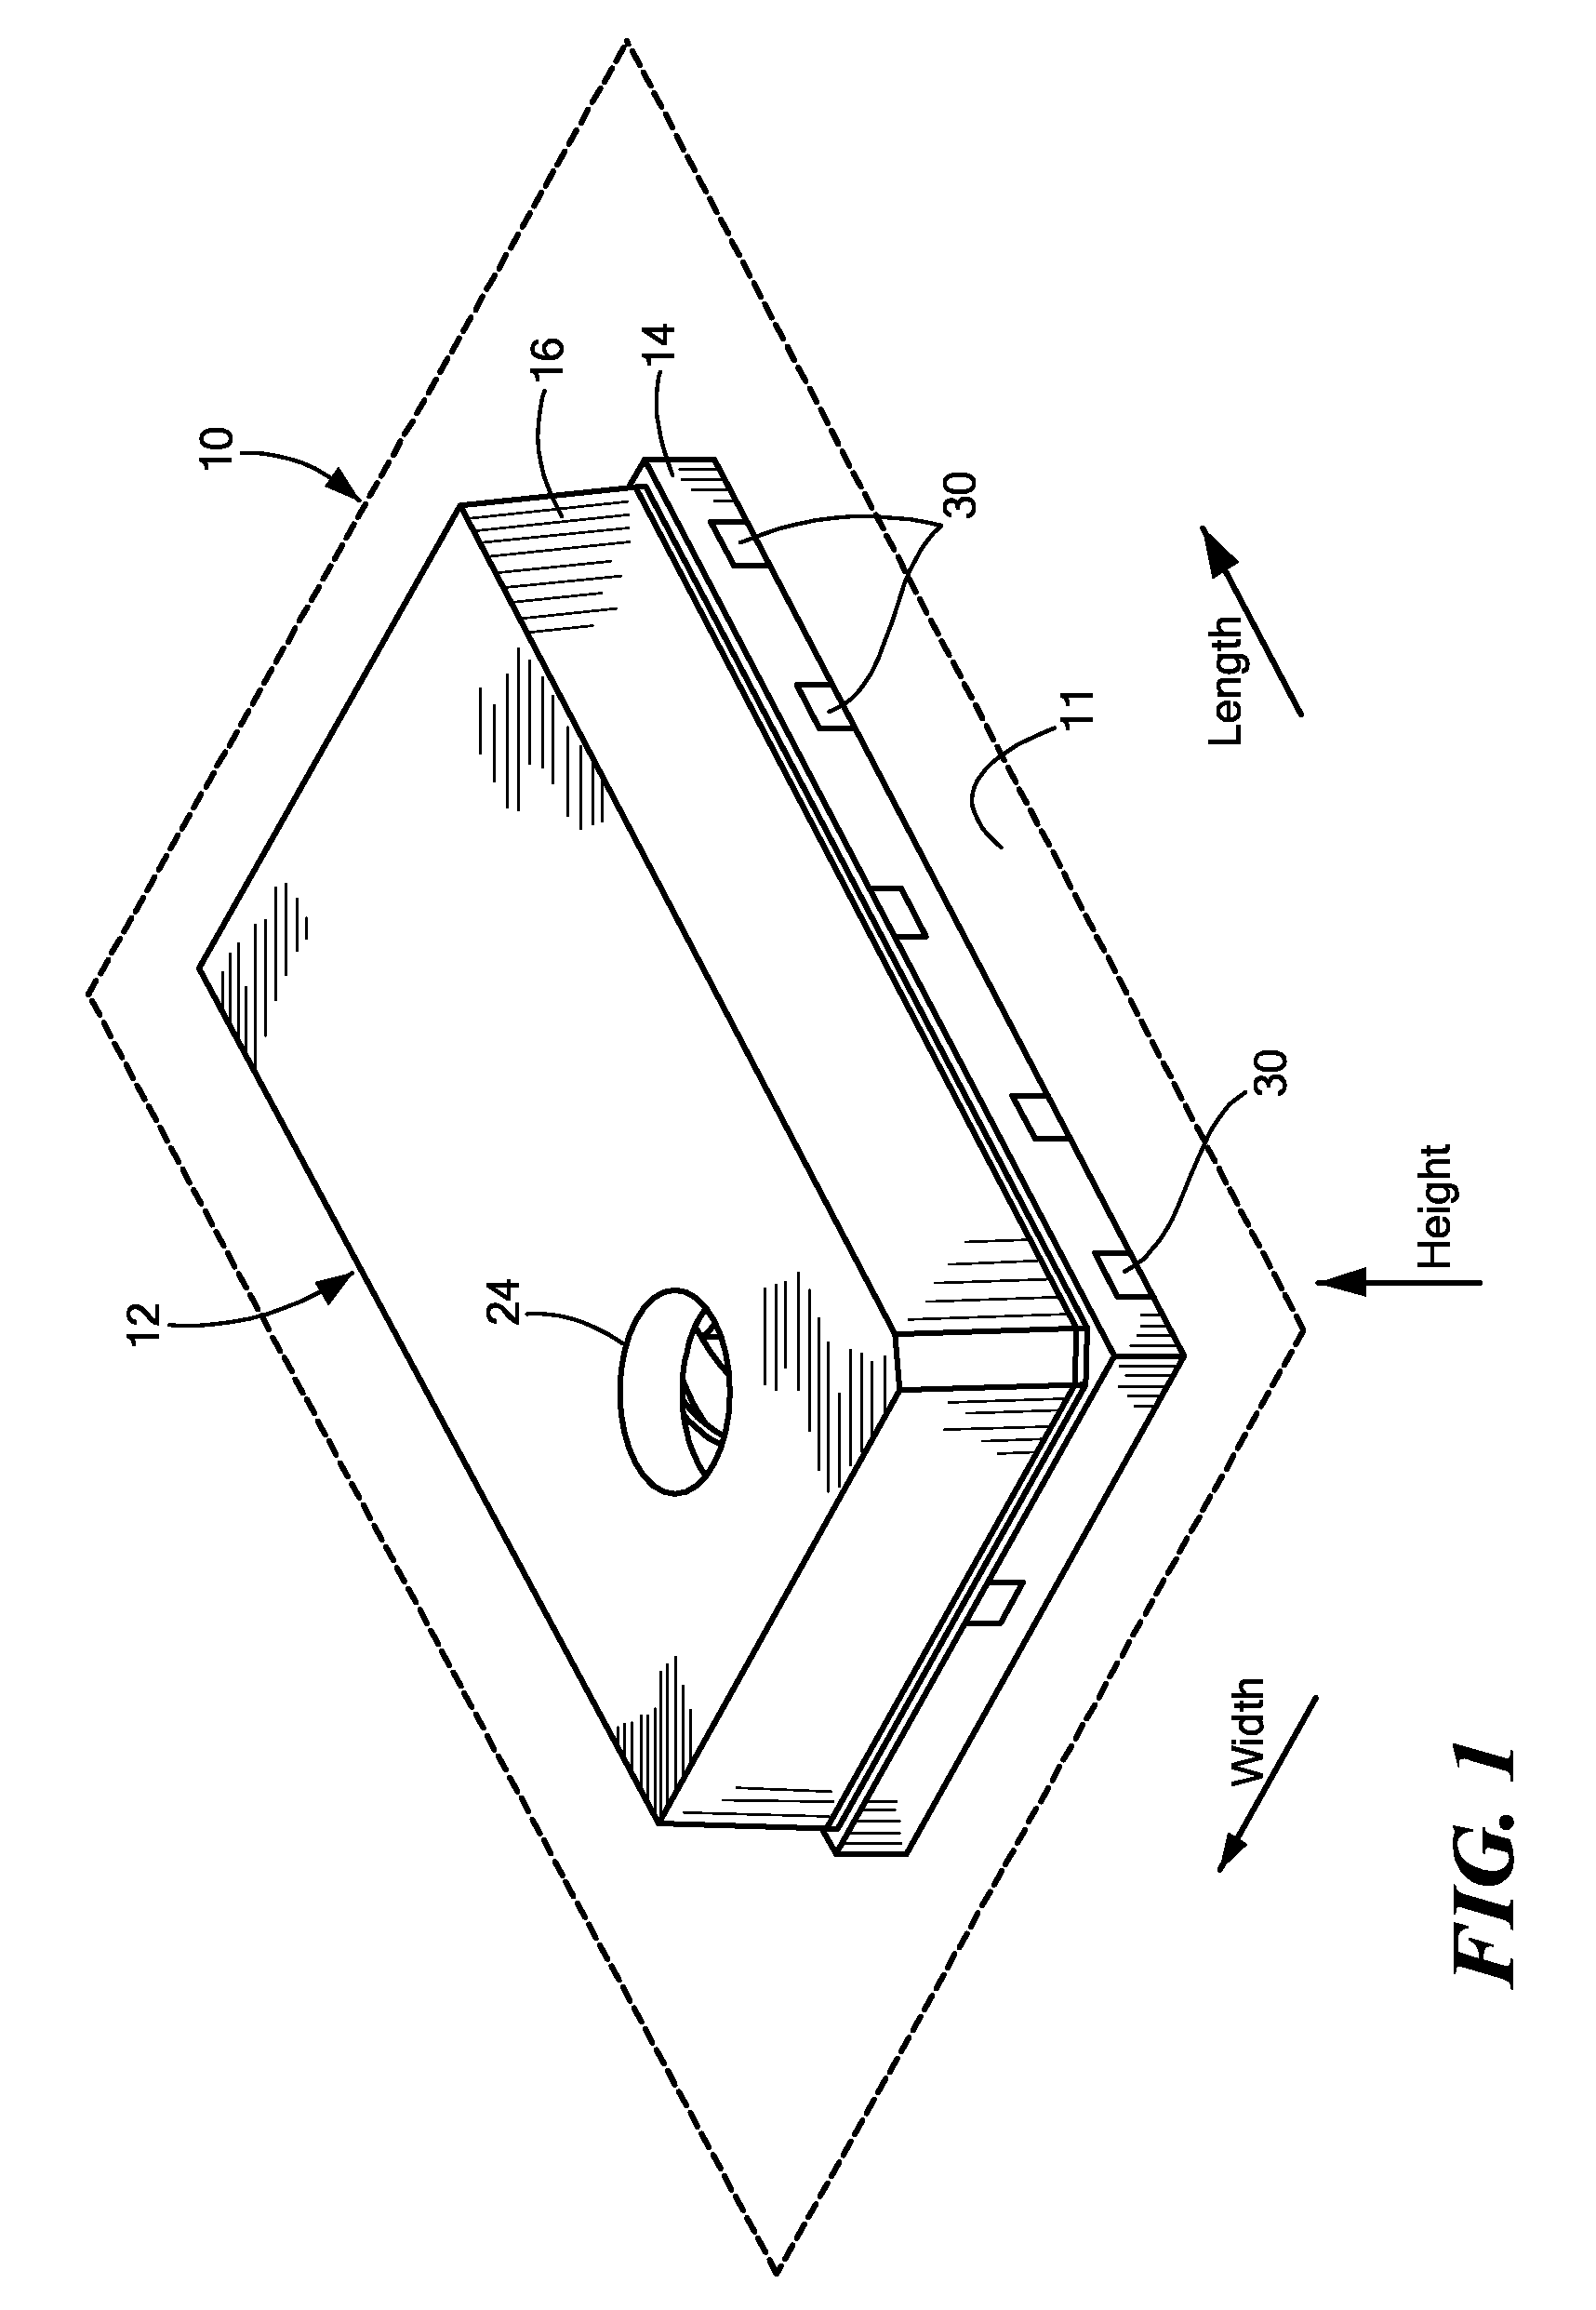 Microphone System with Silicon Microphone Secured to Package Lid